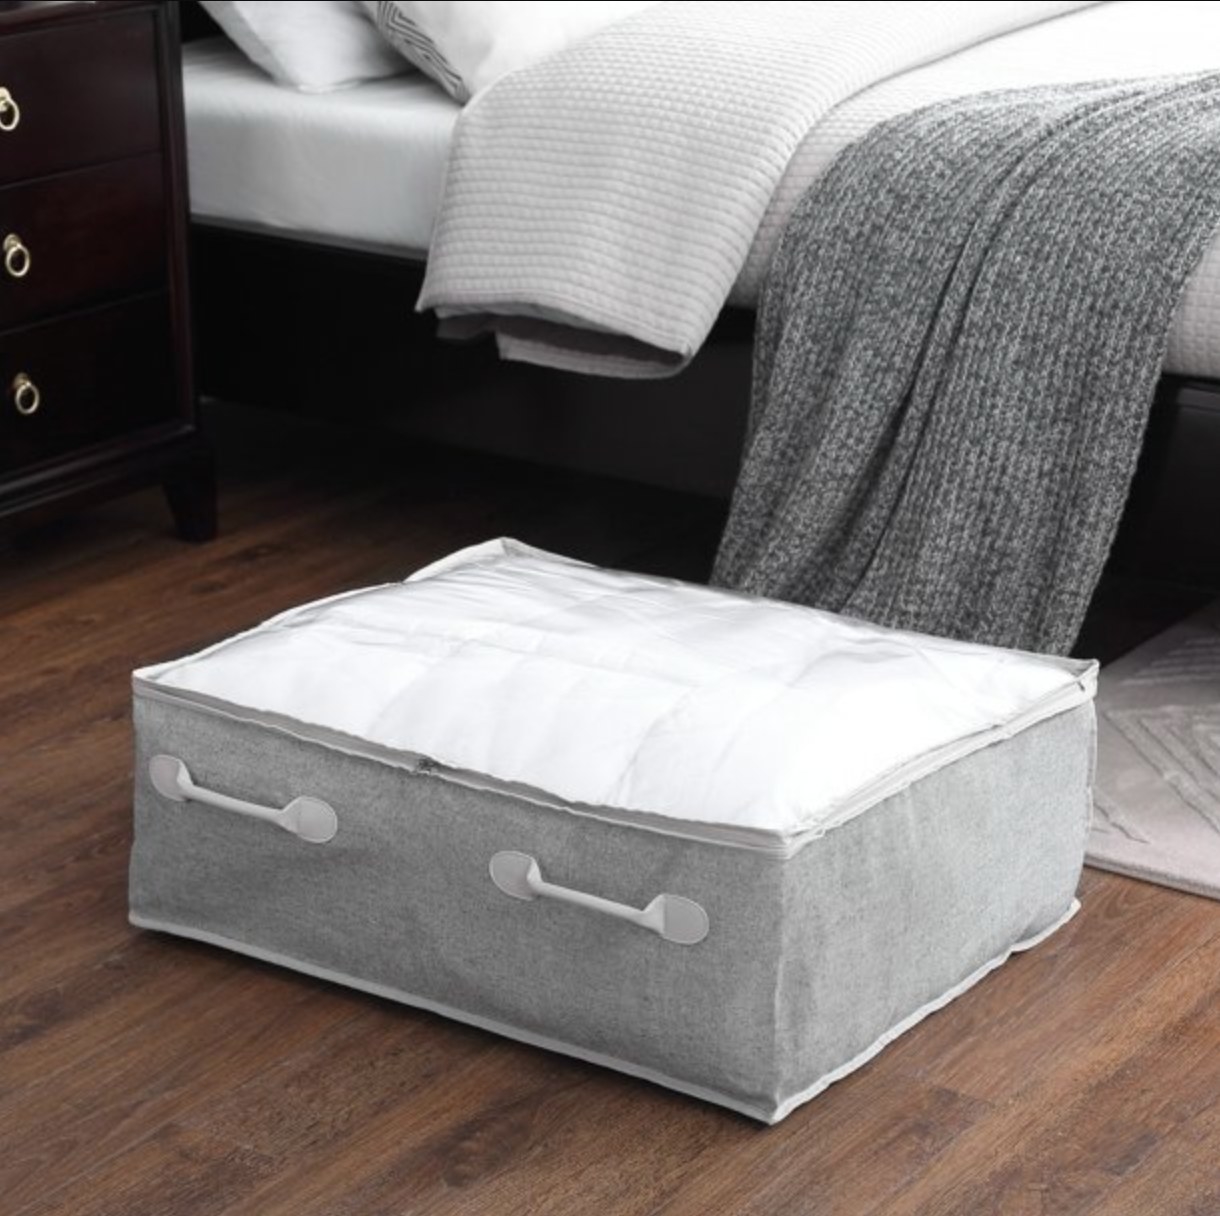 the grey fabric bin pulled out from under a decorated bed